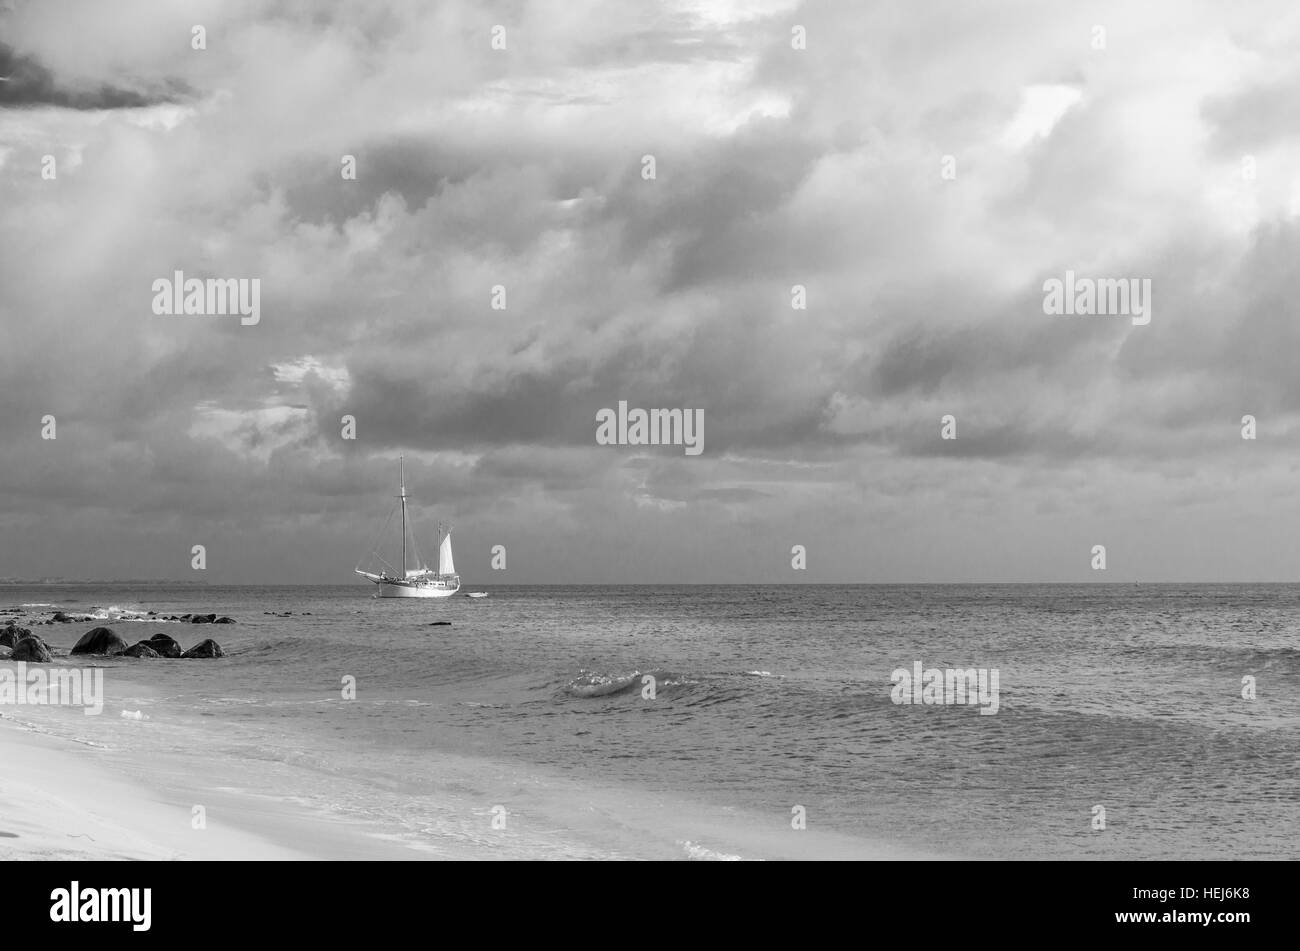 Picture showing a big sailboat on sea navigating towards the beach. The image was taken from Arashi Beach, Aruba, in the Caribbean Sea. Stock Photo